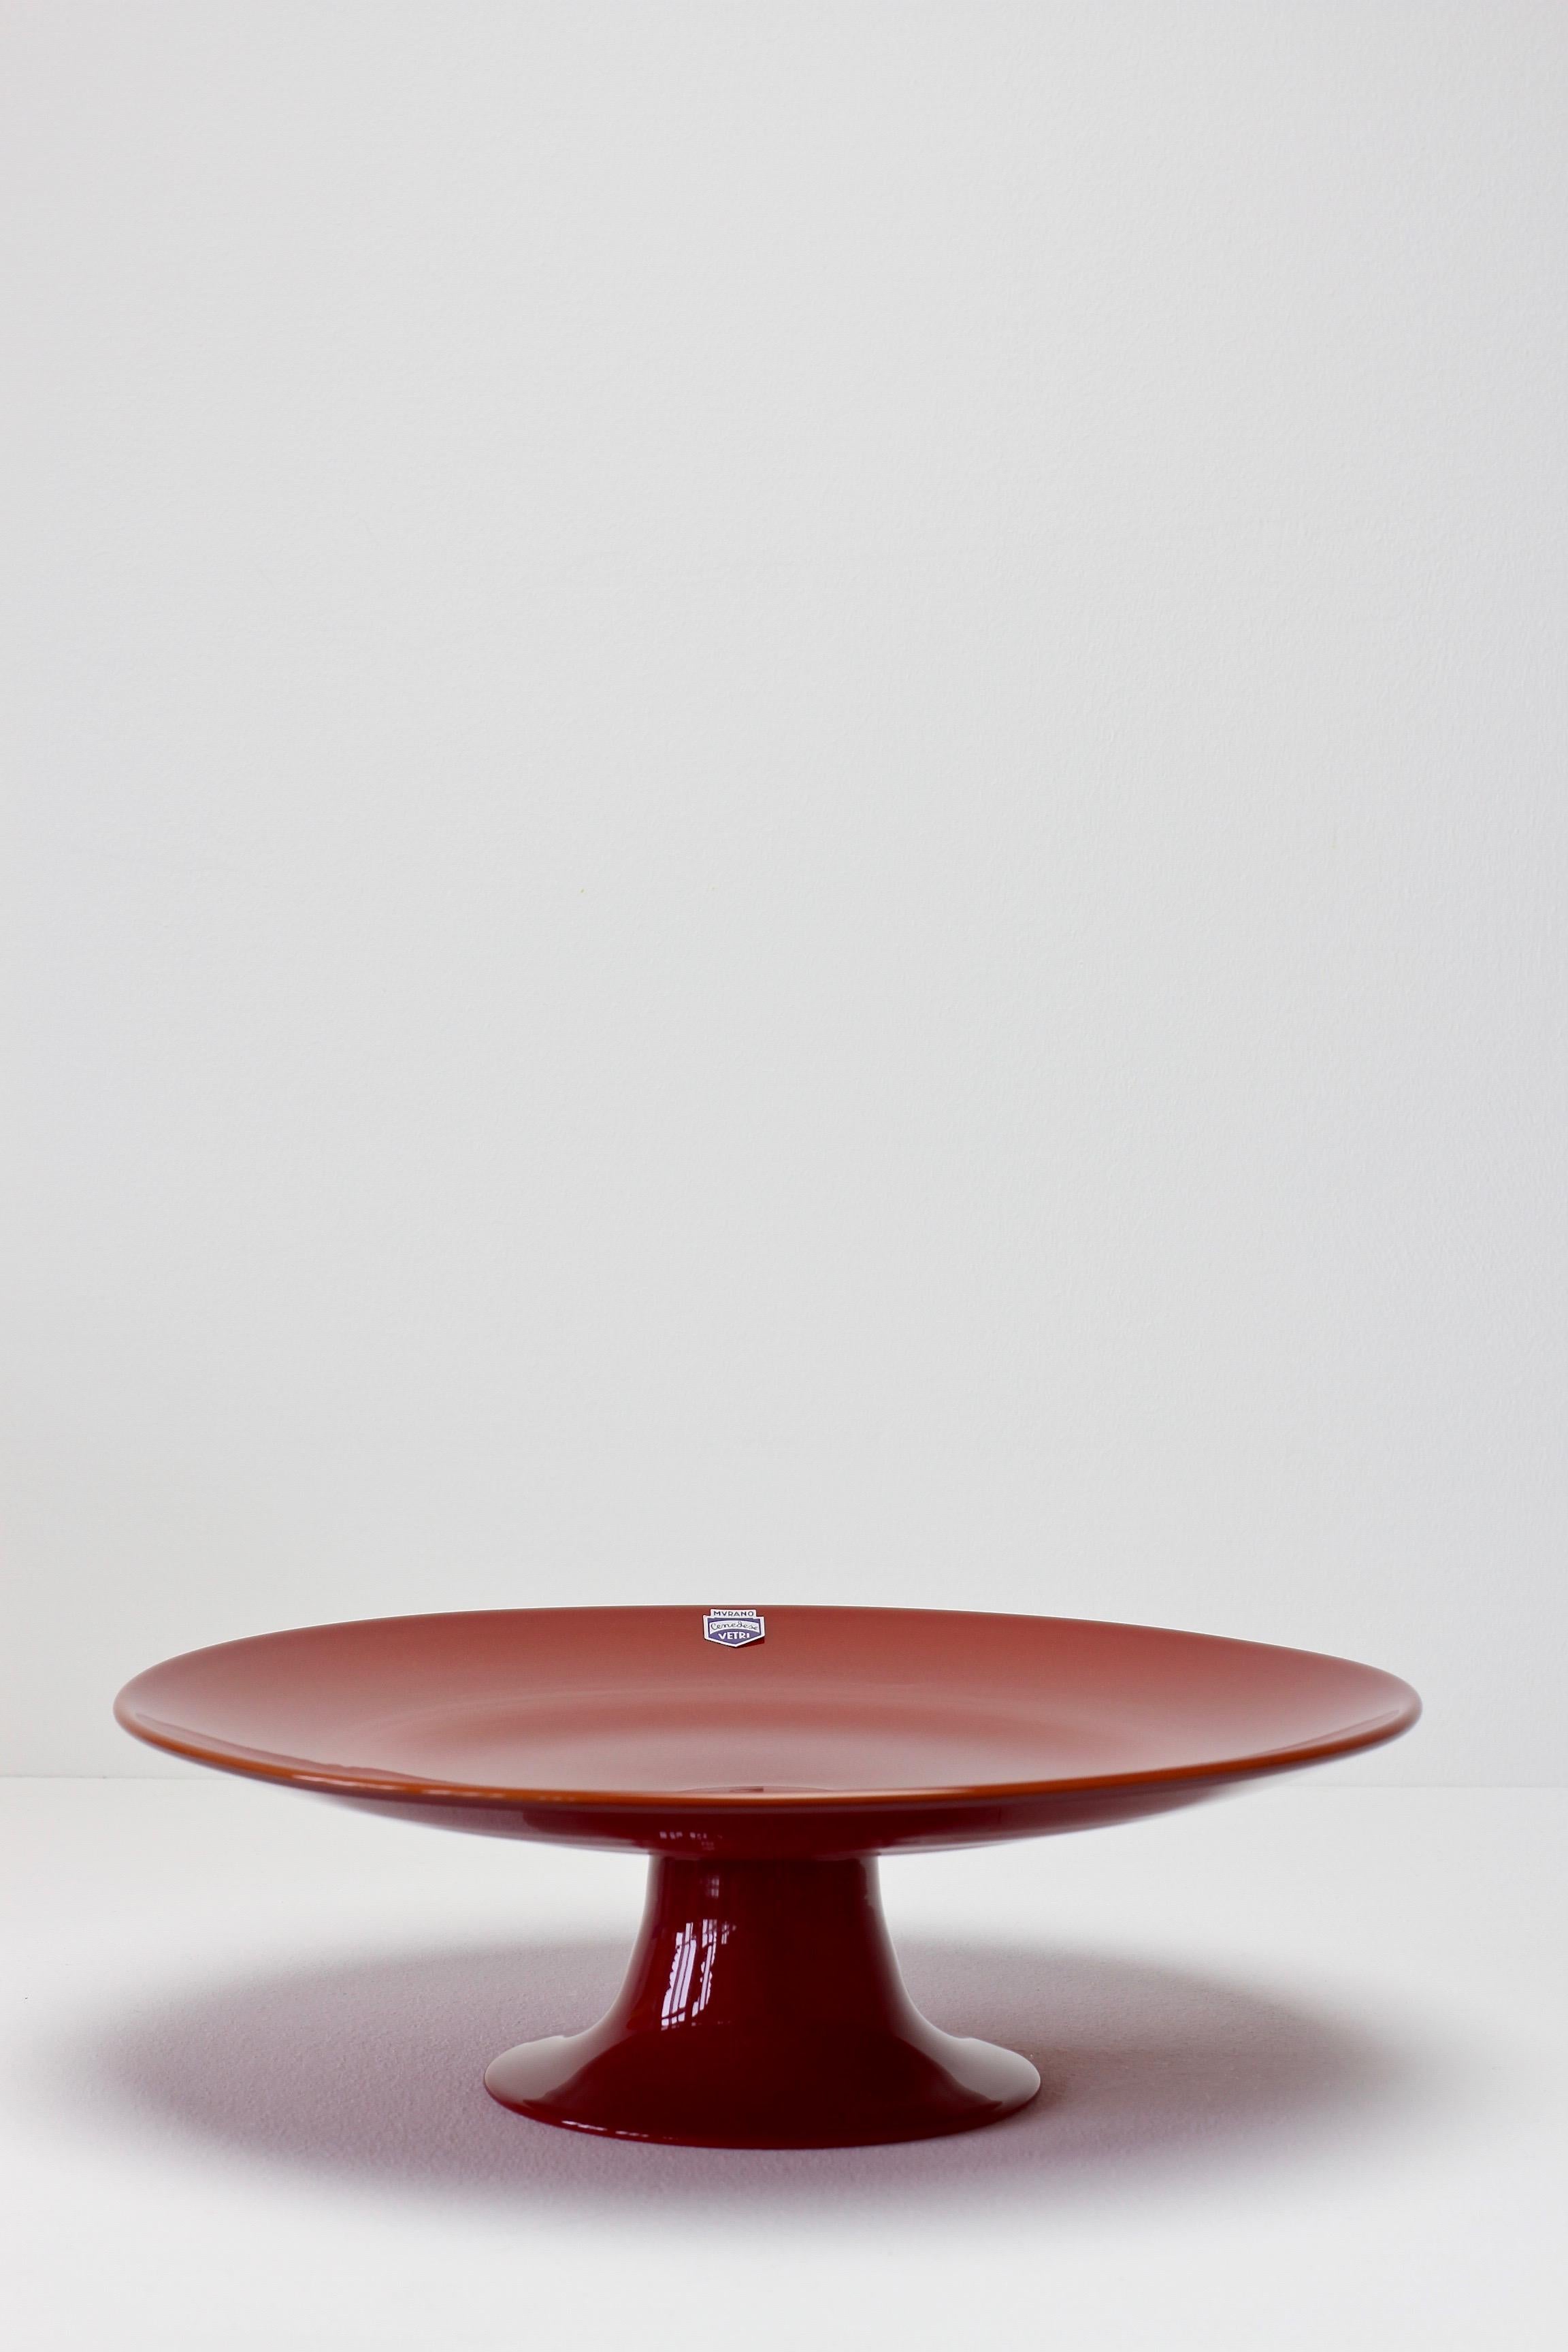 Rare signed Murano glass cake stand or serving plate by Cenedese circa 1970-1990. The design is likely to be by either Antonio da Ros or Ermanno Nason. Wonderful color/colour of dark red and simplistic yet elegant form. Fun to dine with vibrant